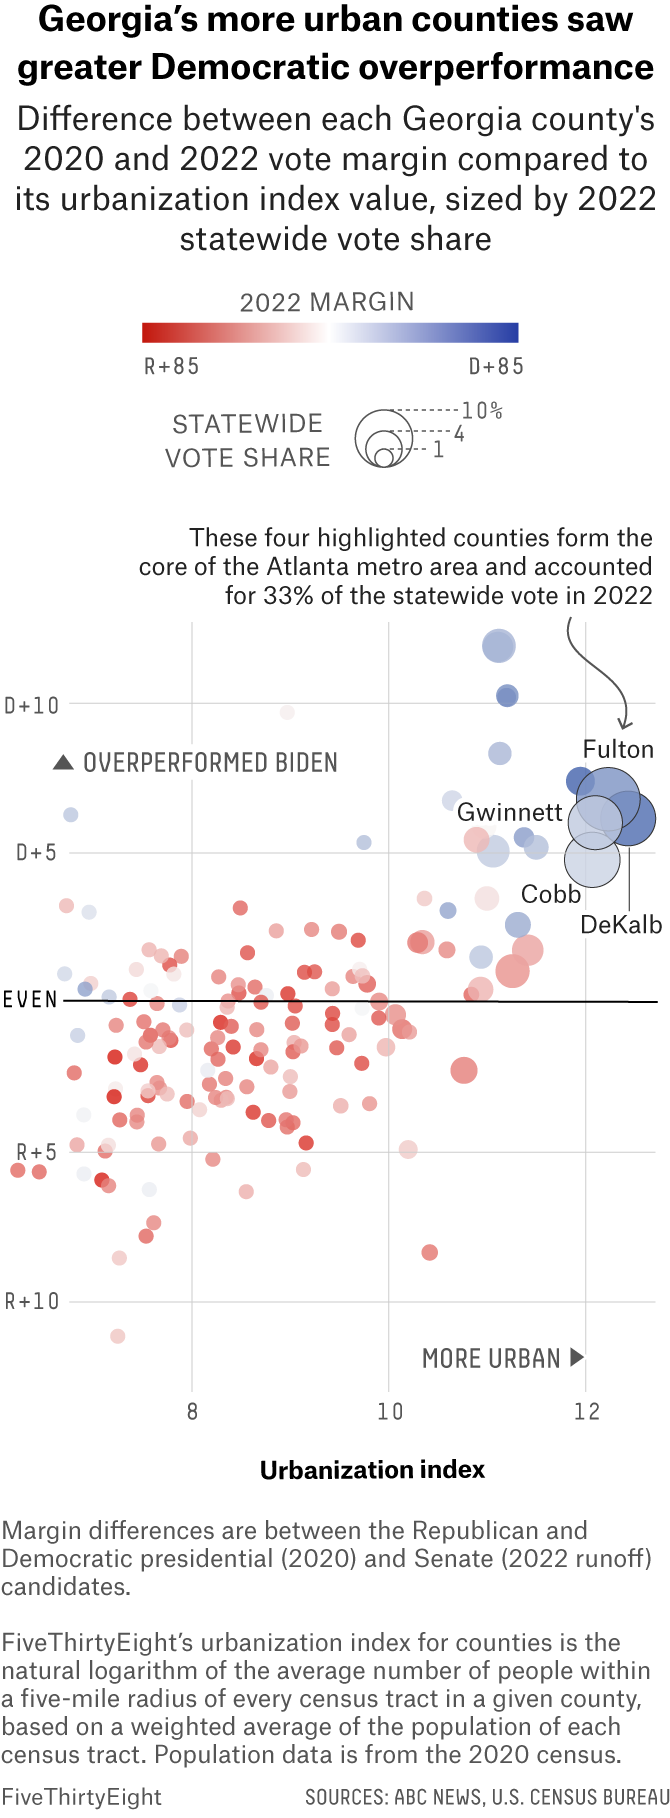 Scatterplot showing the difference between each Georgia county's 2020 presidential election and 2022 Senate race vote margin compared to its urbanization index, sized by 2022 statewide vote share. The largest and bluest bubbles are on the right of the plot, indicating they are more urban and suburban. Democratic Sen. Raphael Warnock ran a few points ahead of Biden in these counties.